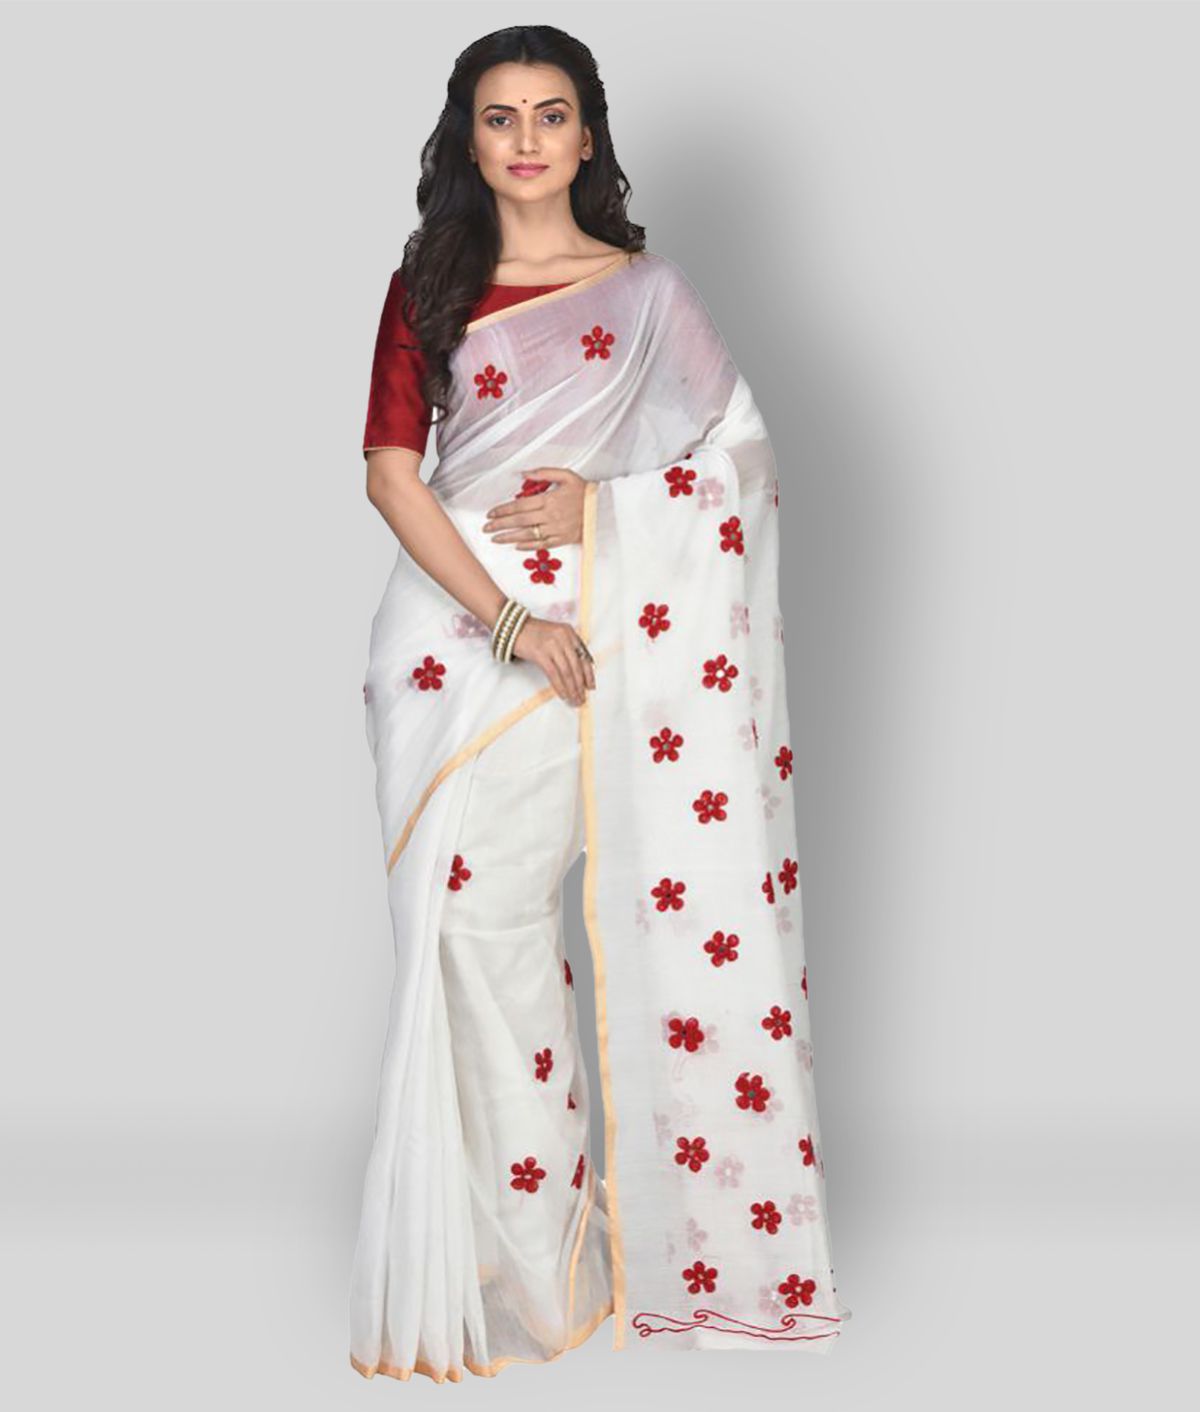 crochetin - White Cotton Saree Without Blouse Piece (Pack of 1)